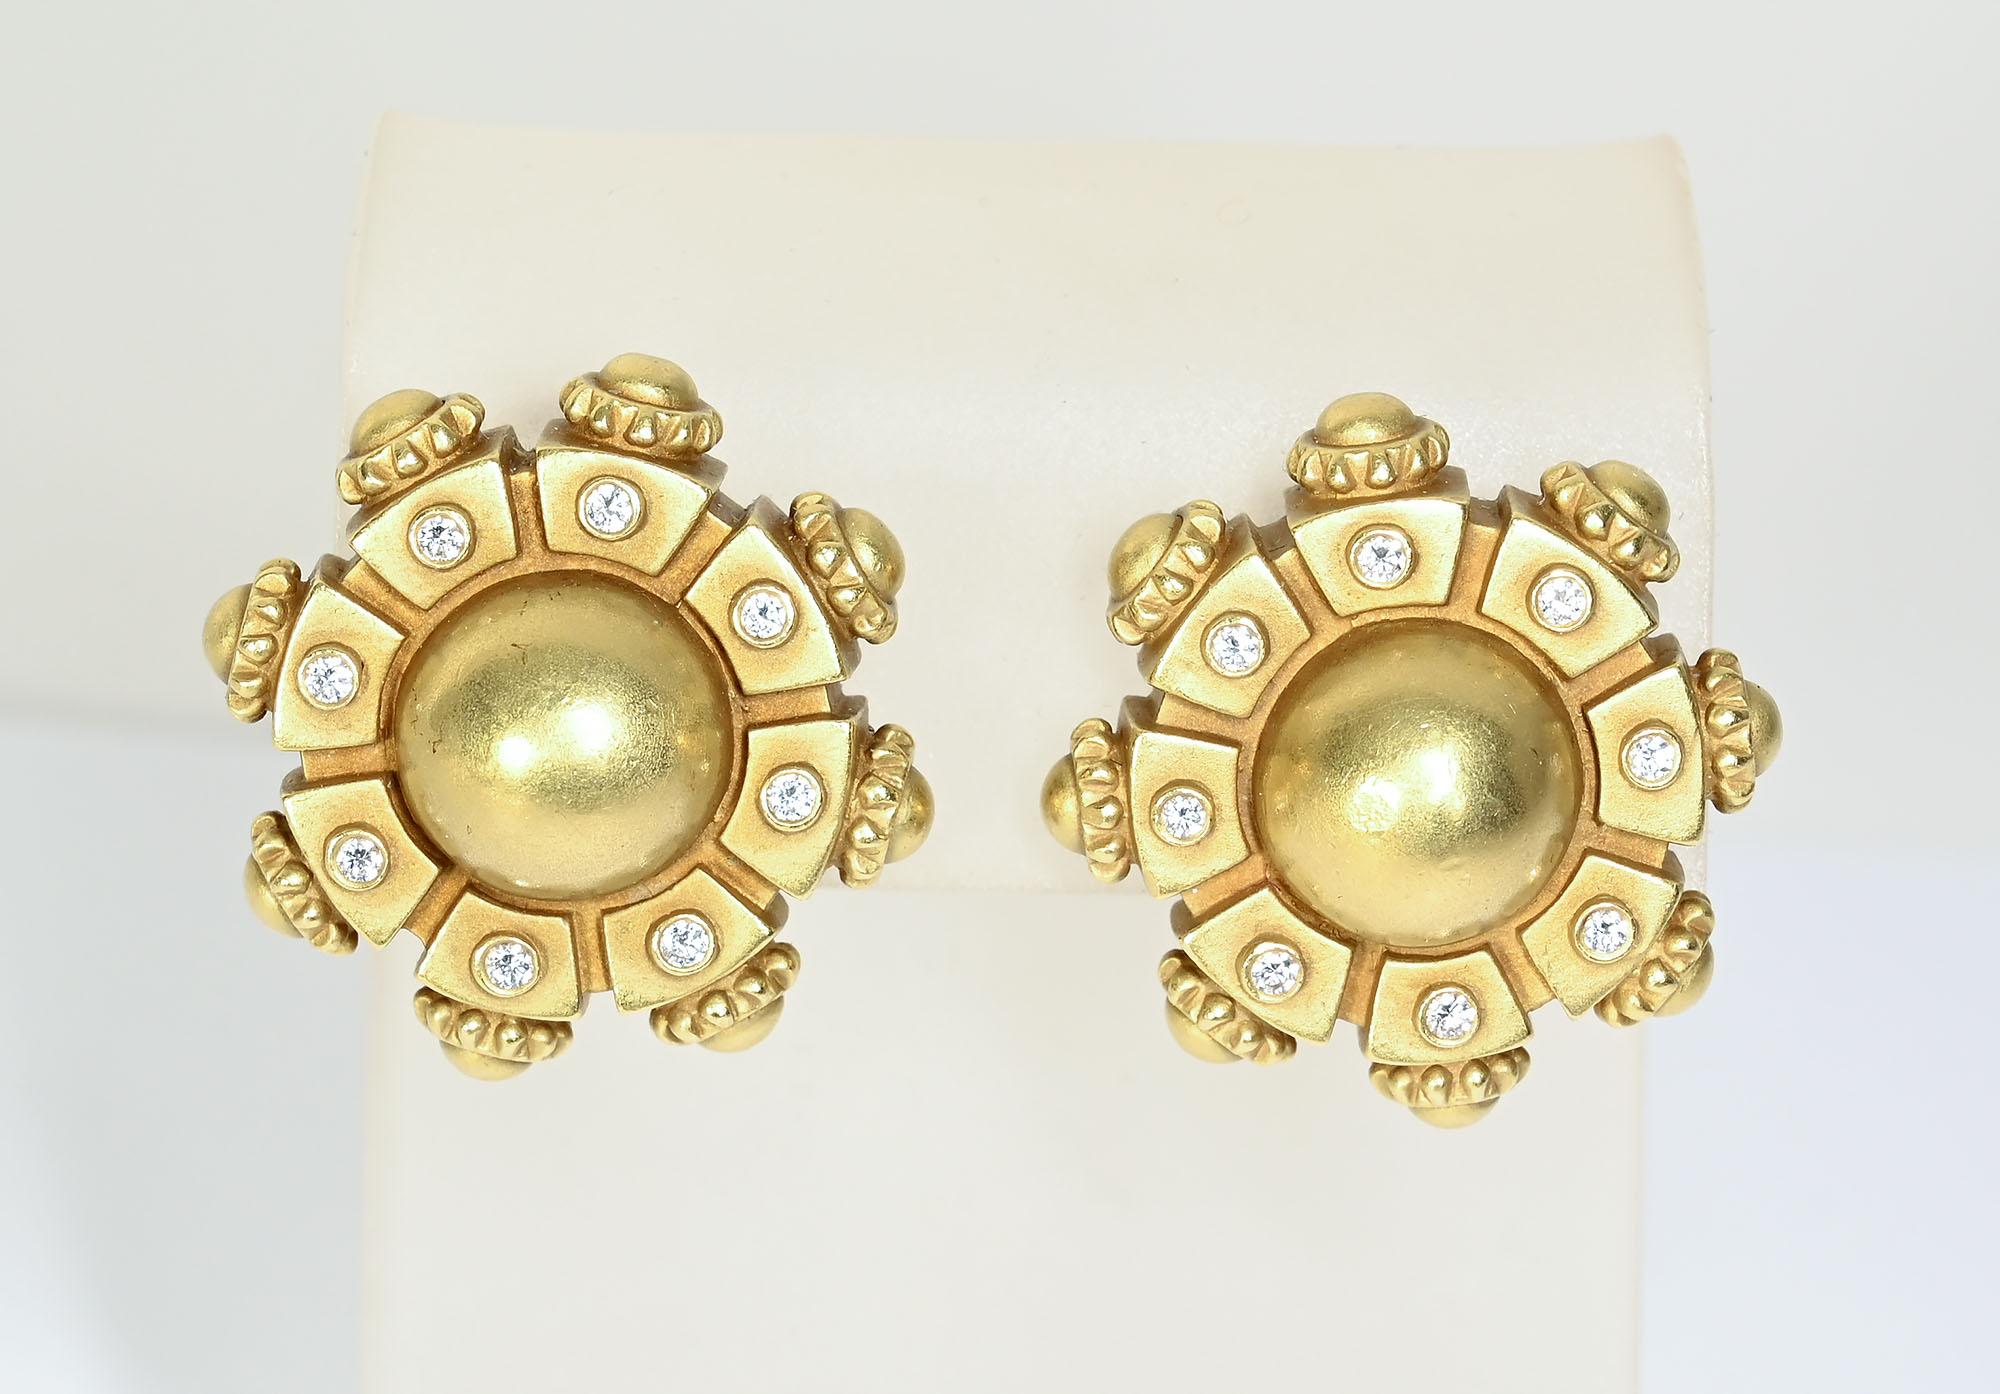 Rare pair of gold and diamonds earrings by Barry Kieselstein Cord. The earrings have a domed round center surrounded by 8 rectangular plaques, each centered with a diamond. The outside of the plaques echoes the center dome with  tiny half circles as